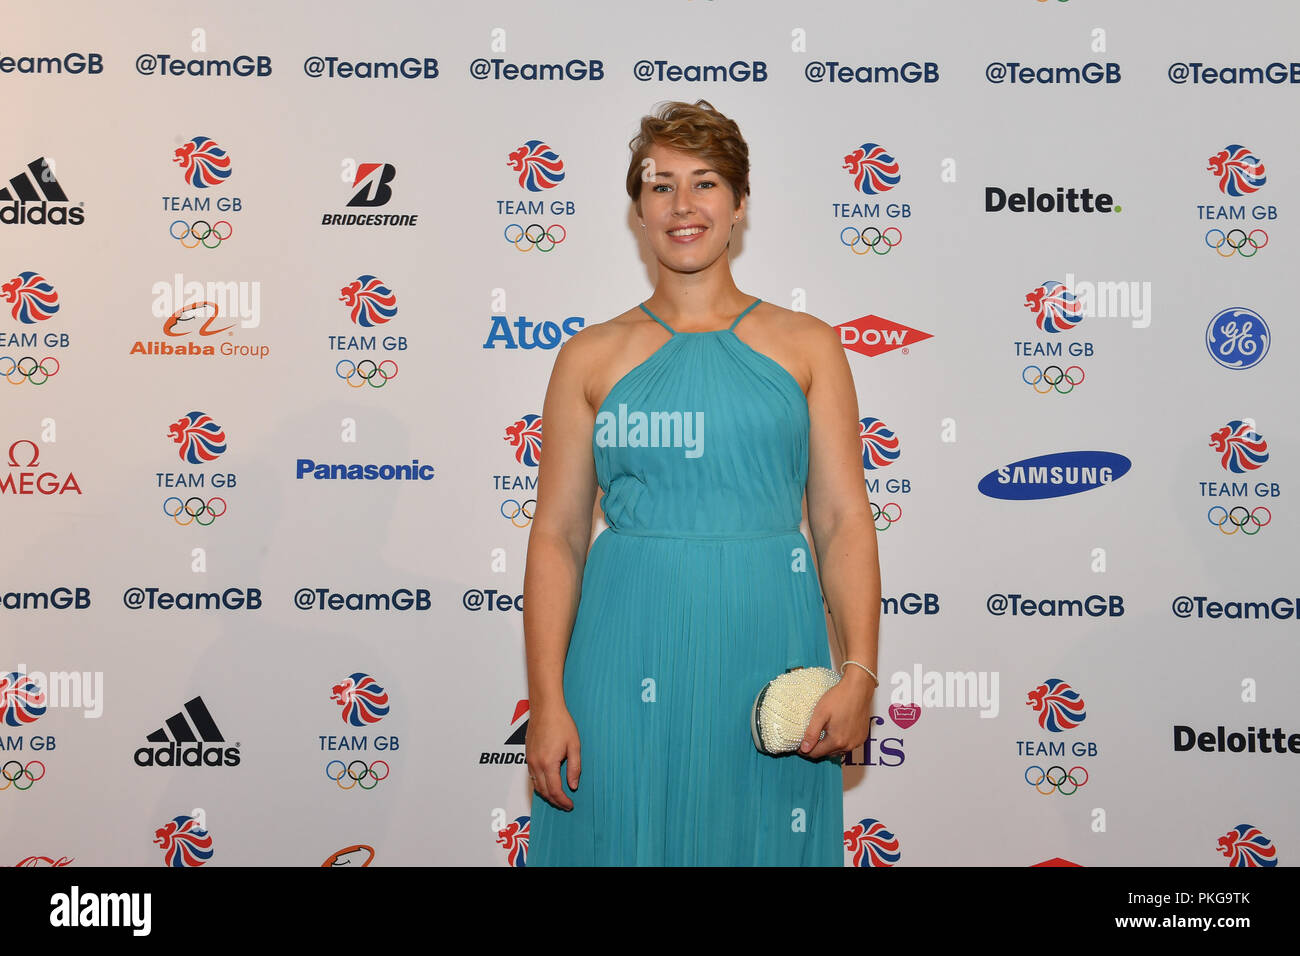 London, UK. 13th September 2018. Lizzy Yarnold attends the Team GB Ball 2018 - Red Carpet Arrivals on Thursday, September 13, 2018, at the Royal Horticultural Halls, LONDON ENGLAND. Credit: Taka Wu/Alamy Live News Stock Photo